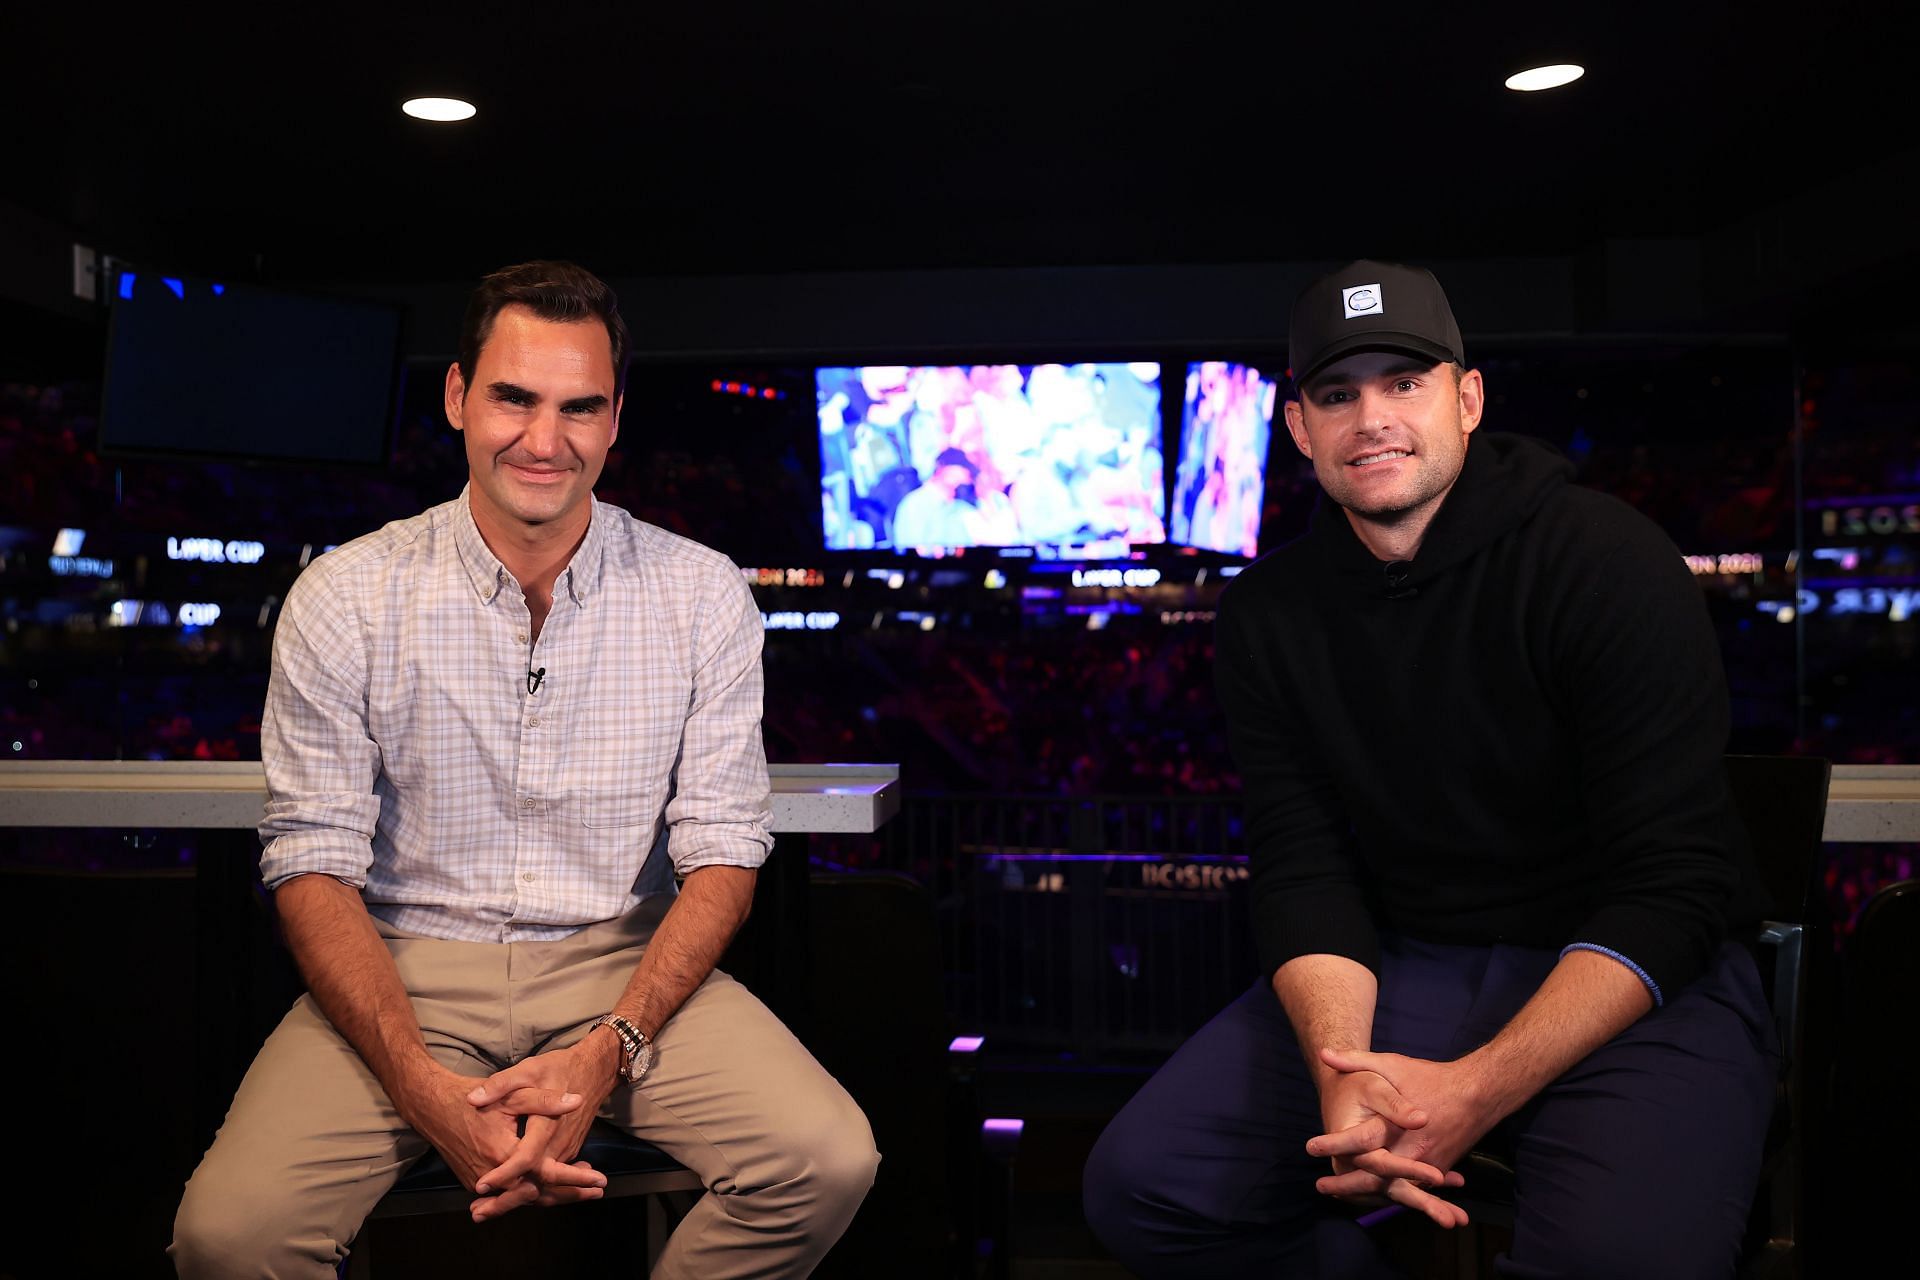 Roger Federer and Andy Roddick during the 2021 Laver Cup